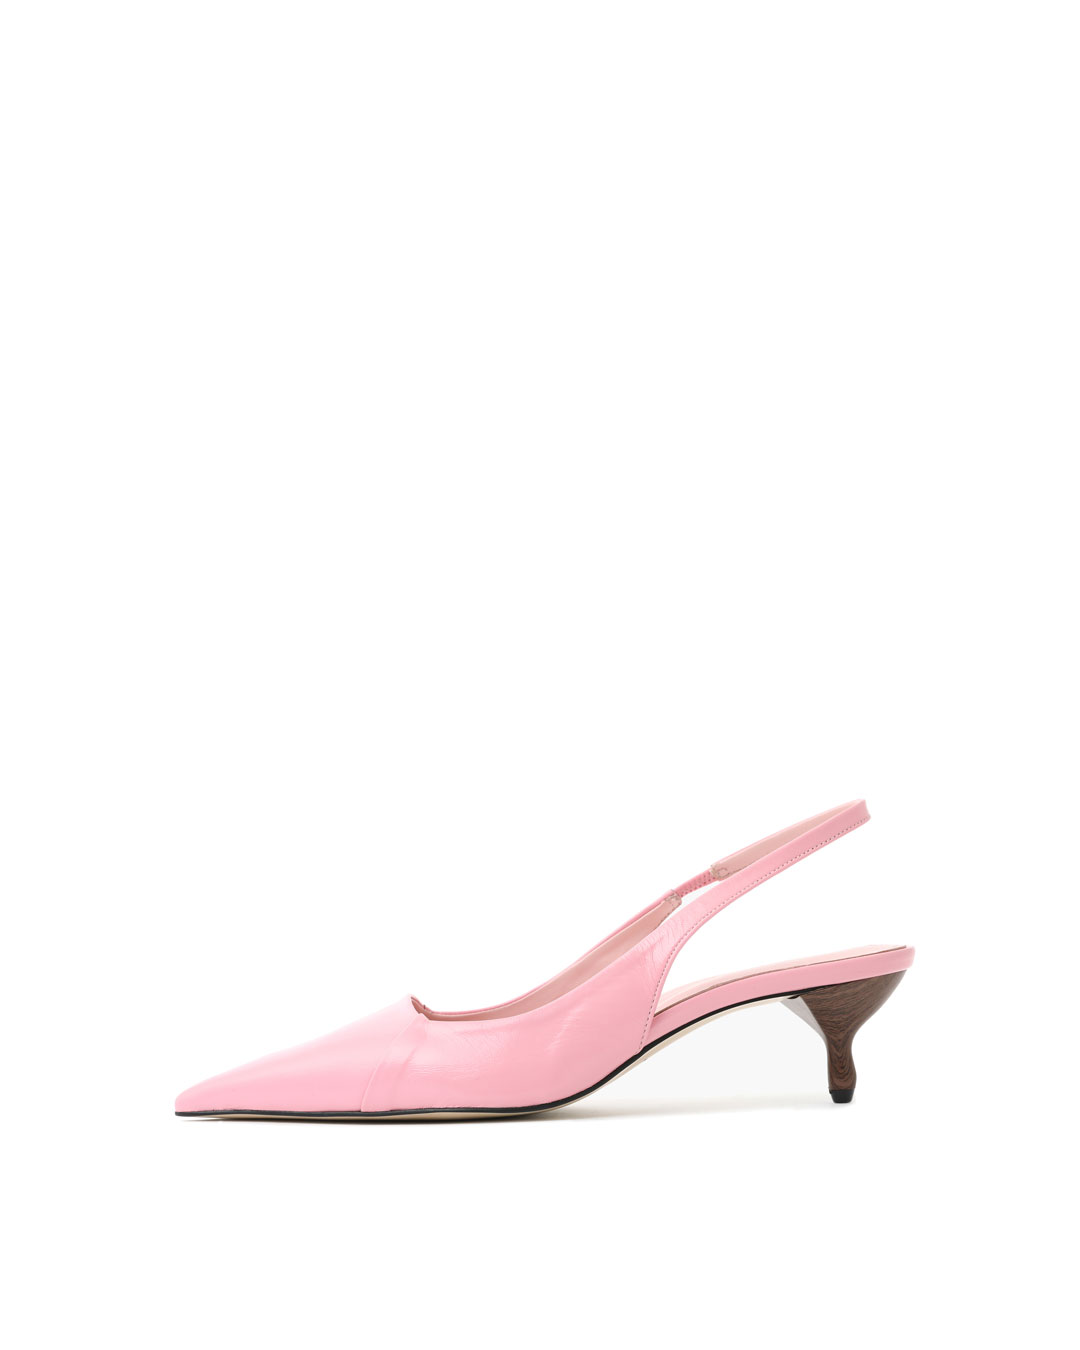 The Line Slingback - PINK (Pre-Order 20off -2/18까지)